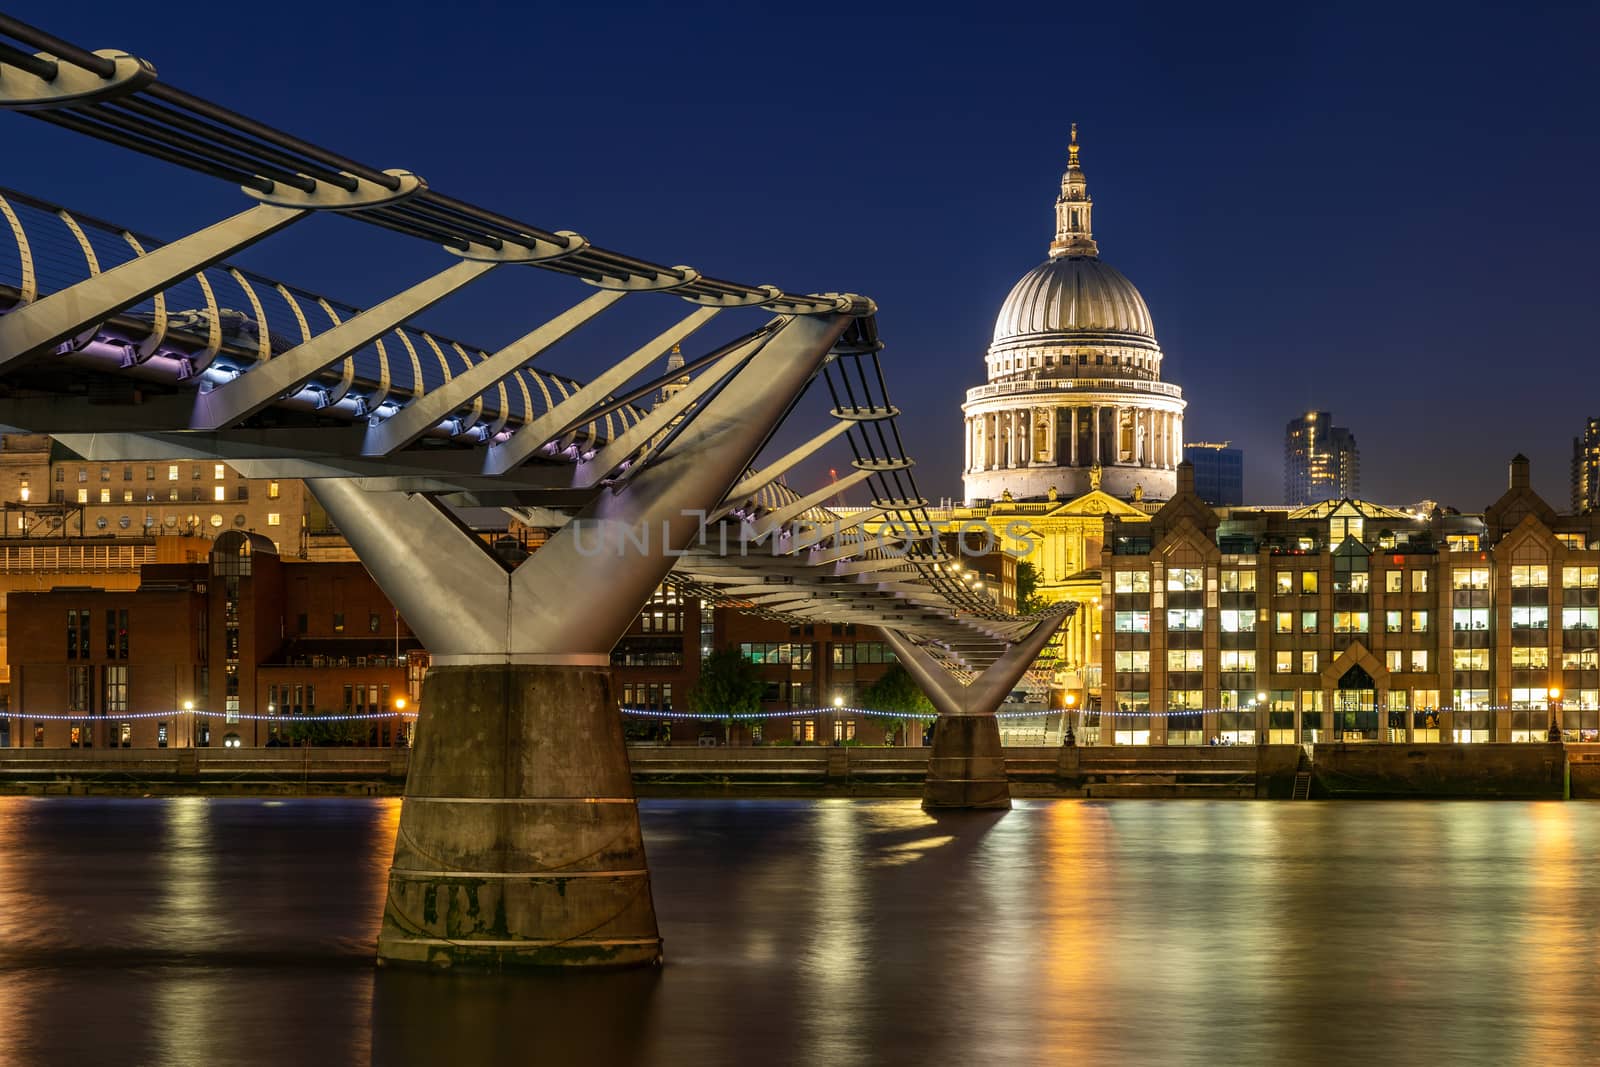 St paul cathedral with millennium bridge  by vichie81